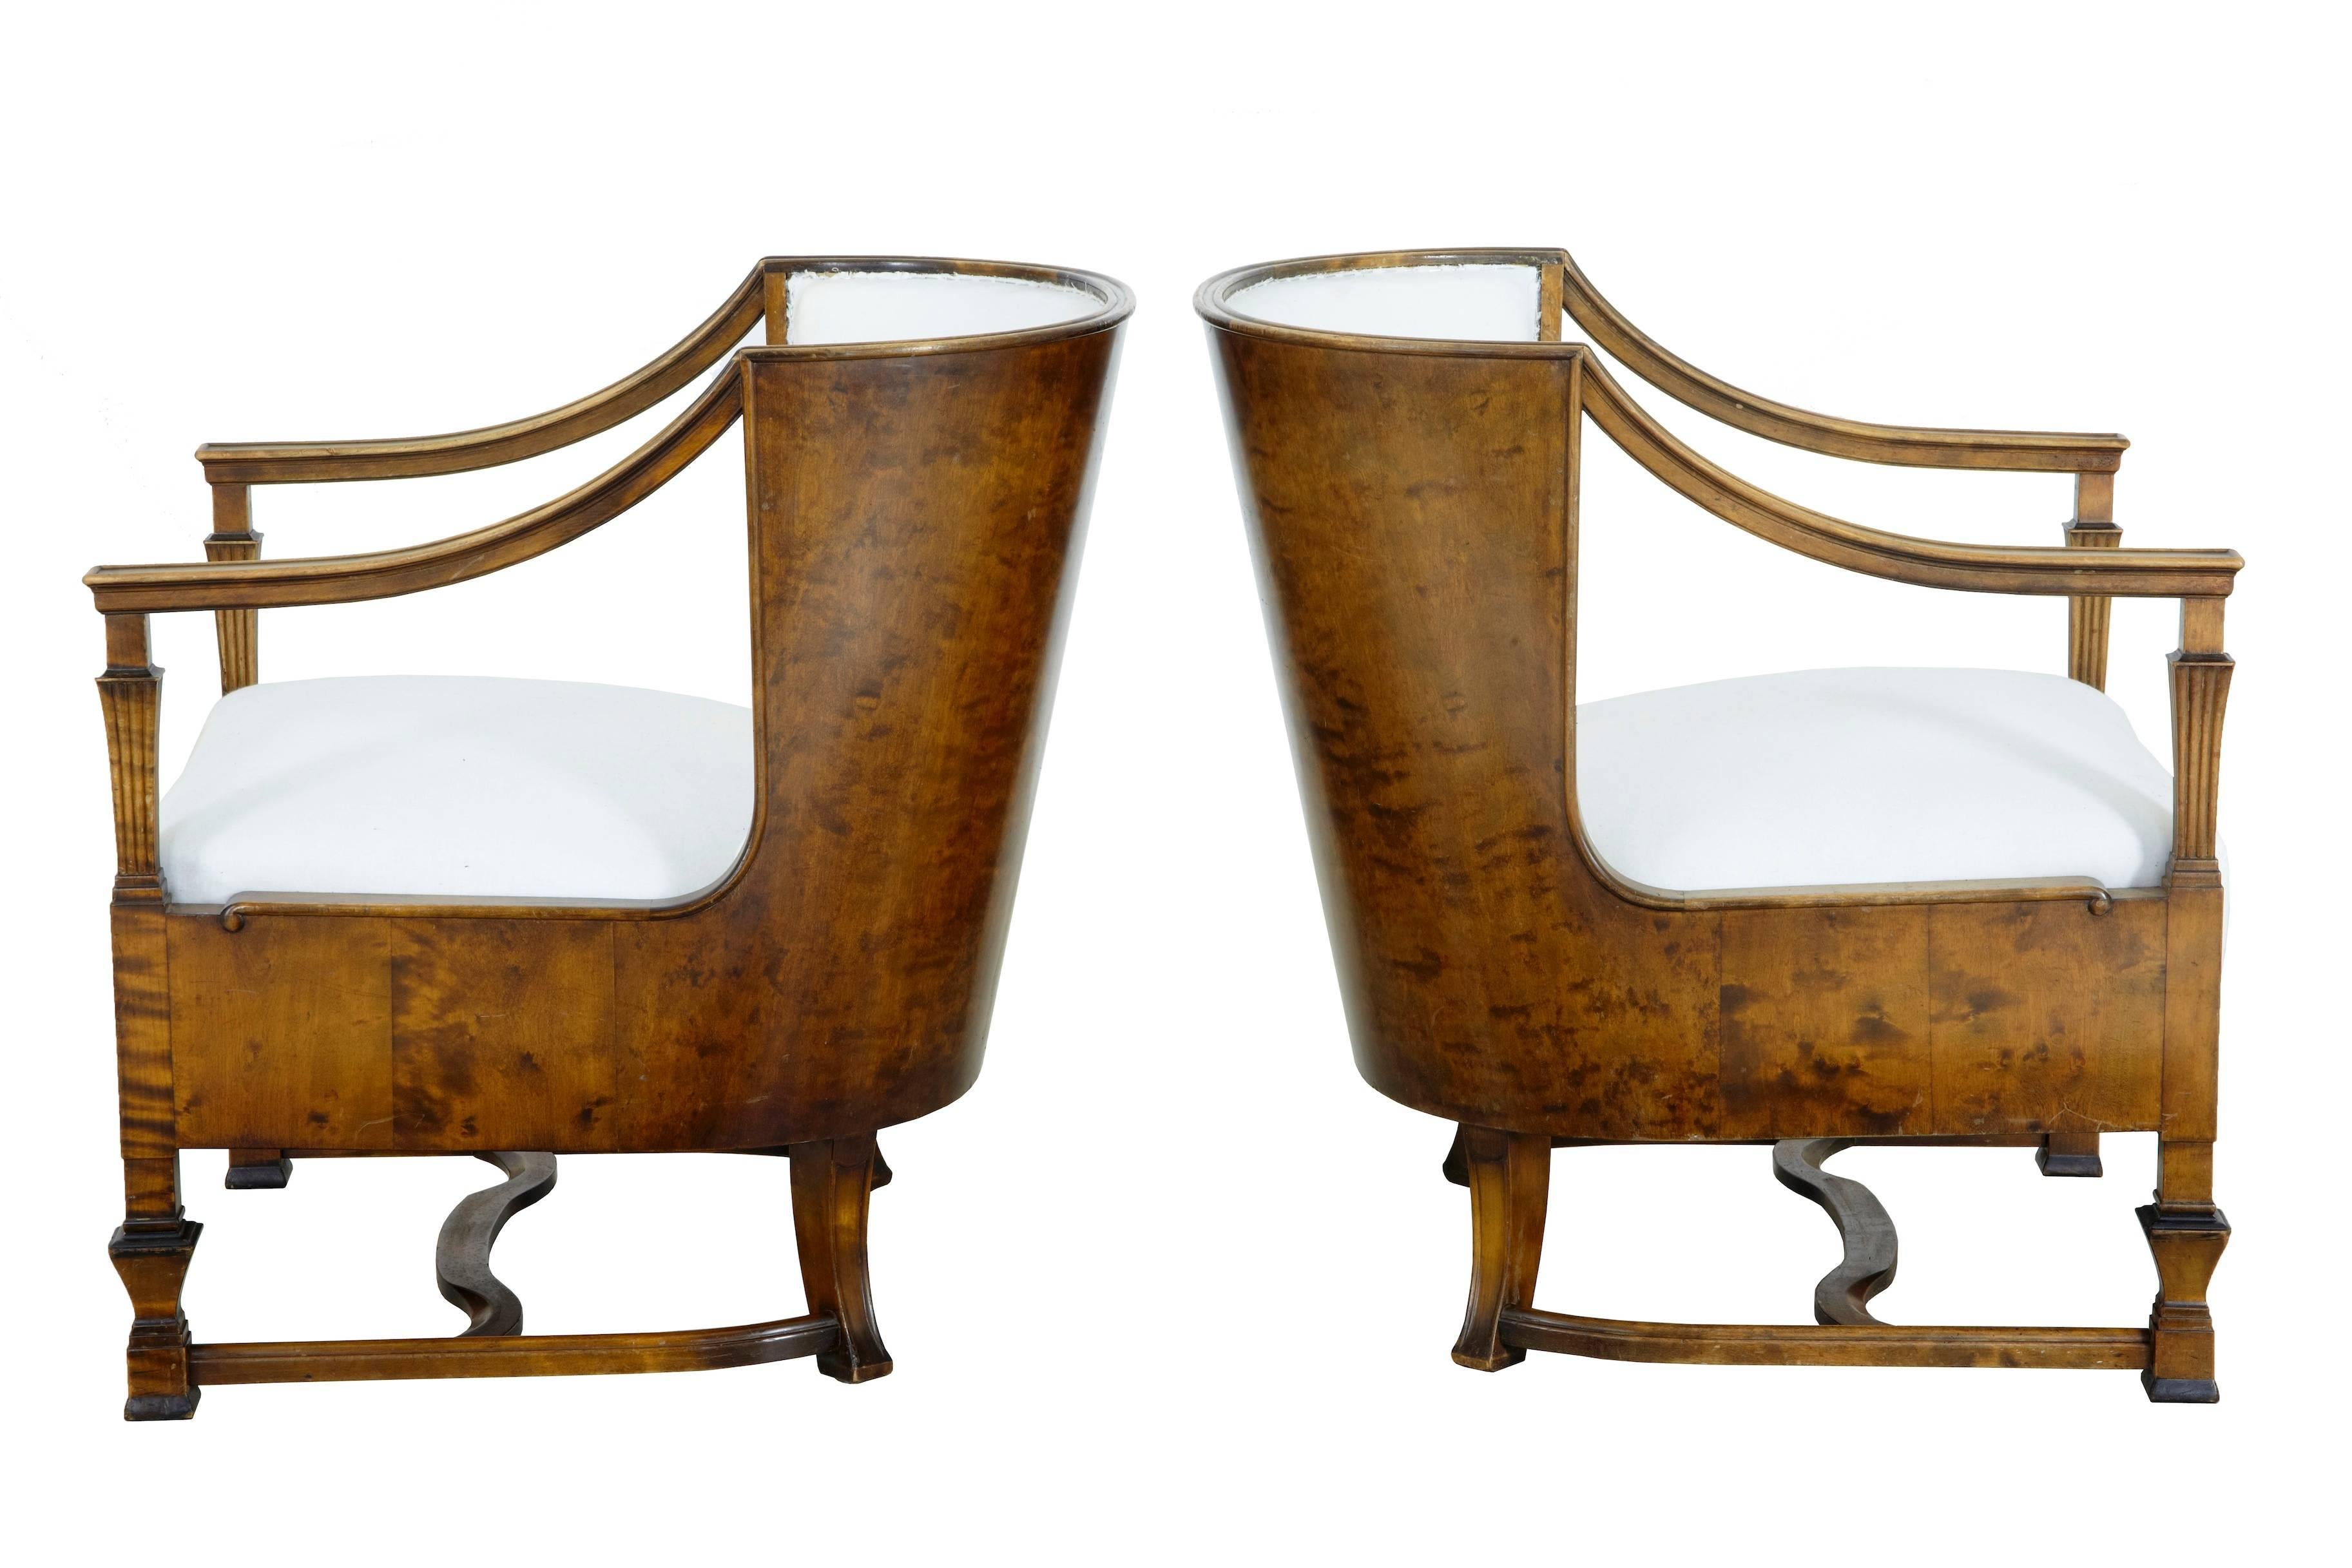 Here we have a pair of chairs of the finest quality from the deco period, circa 1930.
Beautifully made in matching stained birch veneers.
Wrap round backs, leading to the shaped arms which are supported by columns.
Legs united by stretcher.
Some